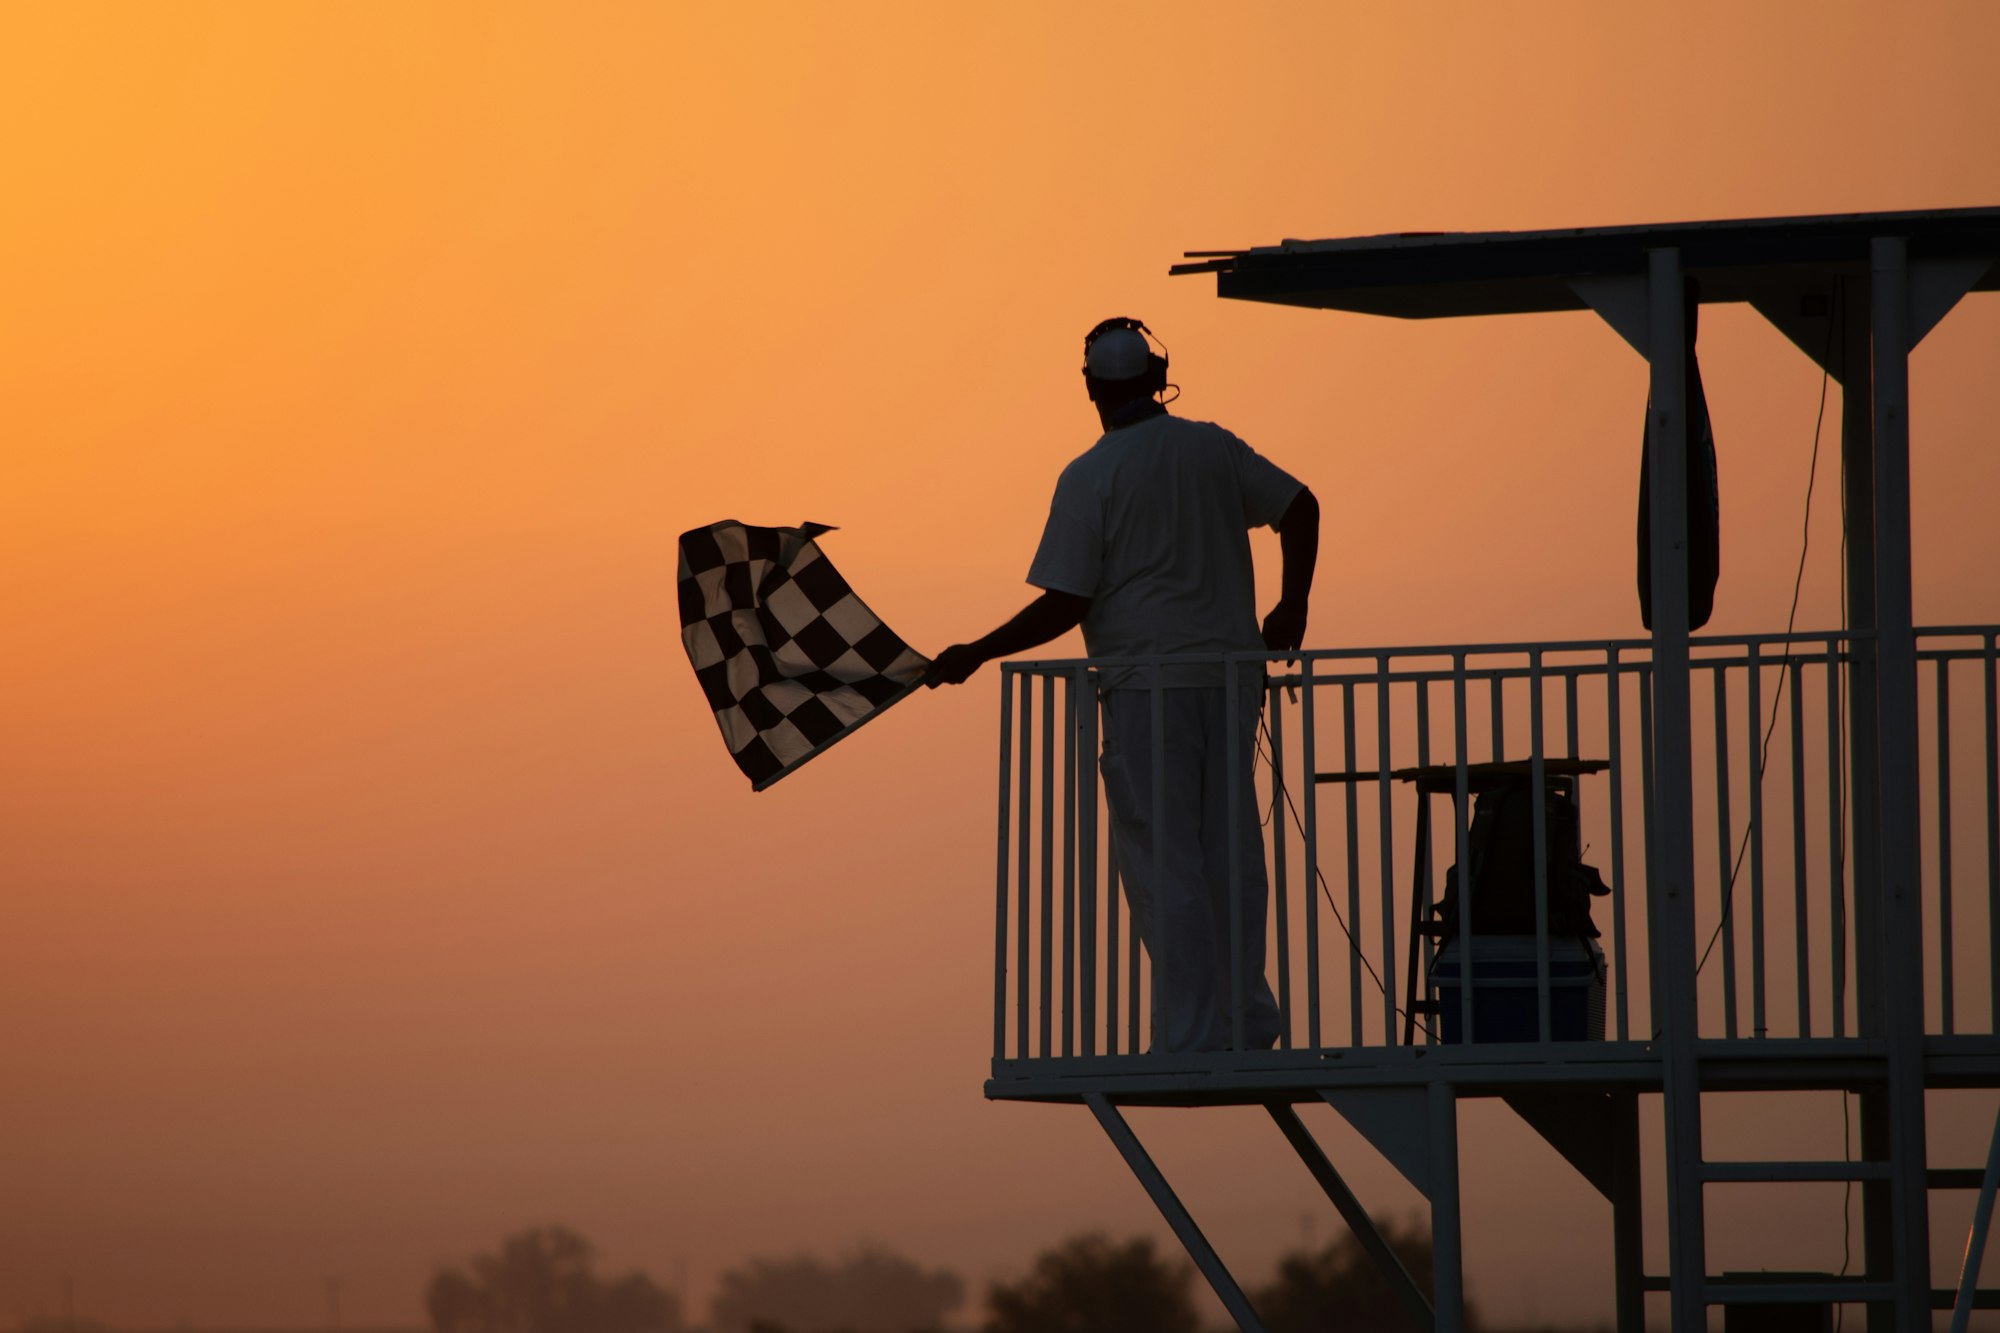 Evening at the race